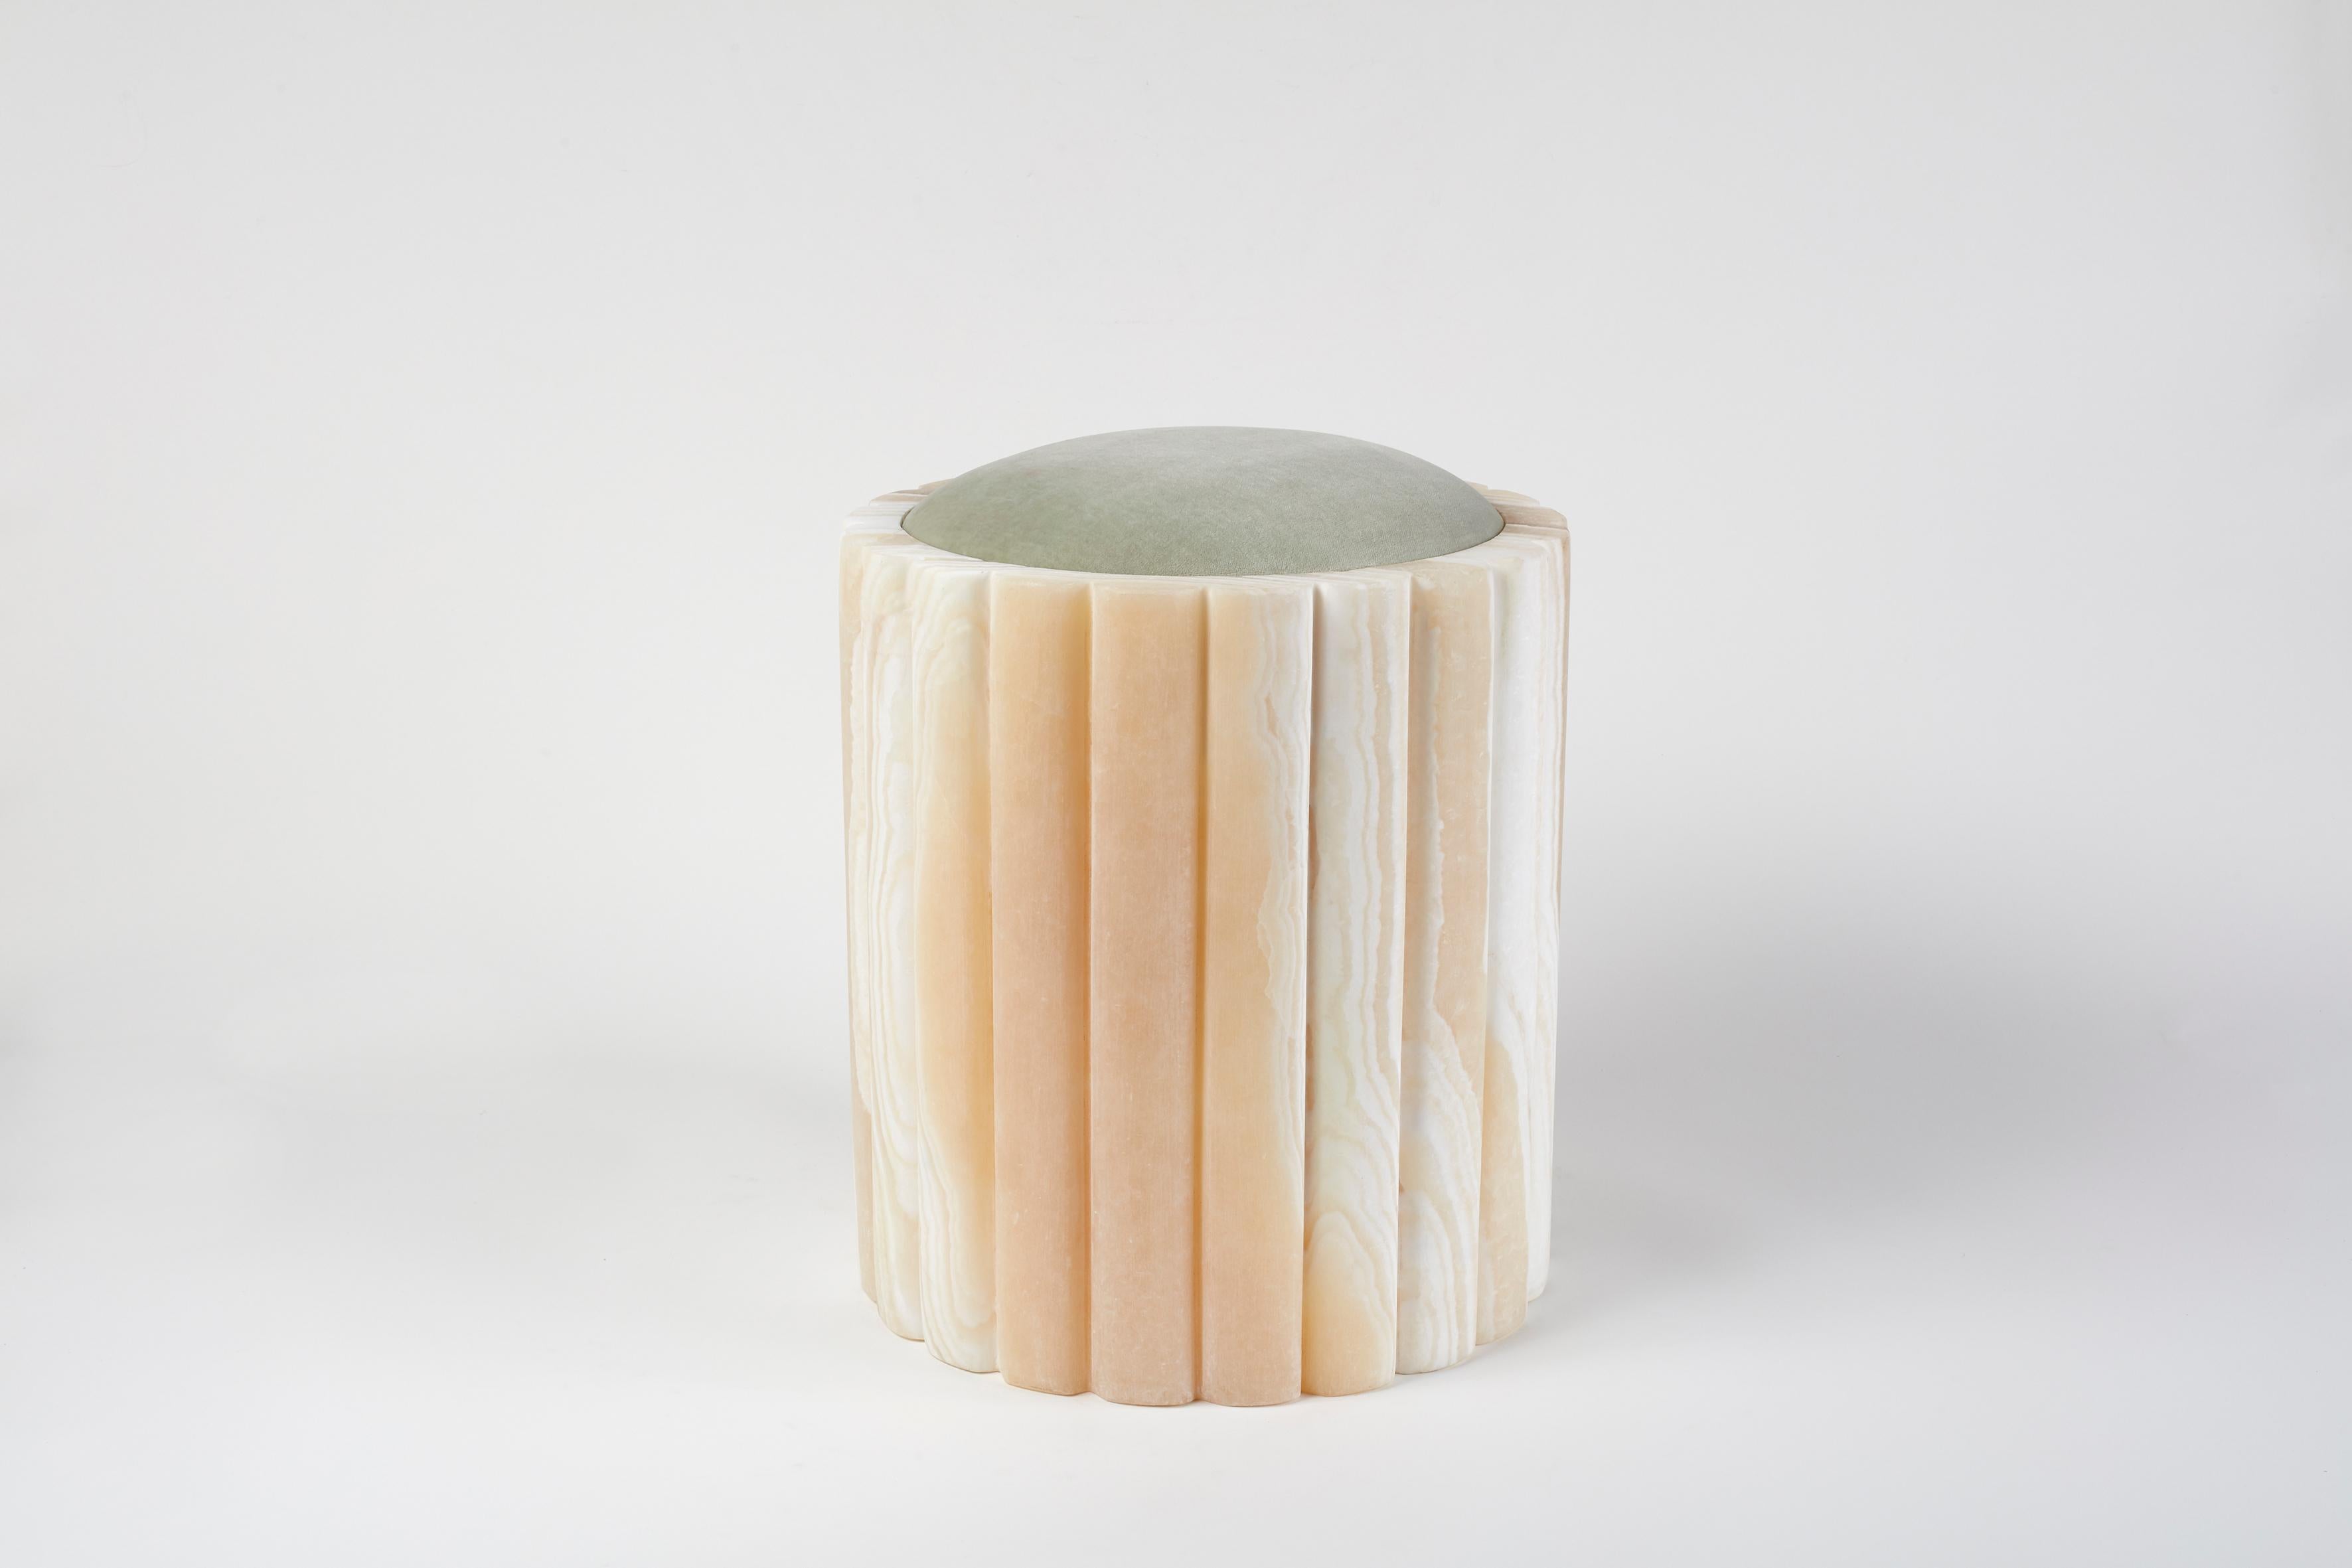 Marguerite Alabaster stool sculpted by Omar Chakil
“TENDRE MARGUERITE” stool -raw massive hand carved
Egyptian Alabaster, 100% cotton velvet
Measures: Diameter 32cm x height 38cm
Numbered and signed
Alabaster pillow available in light green and